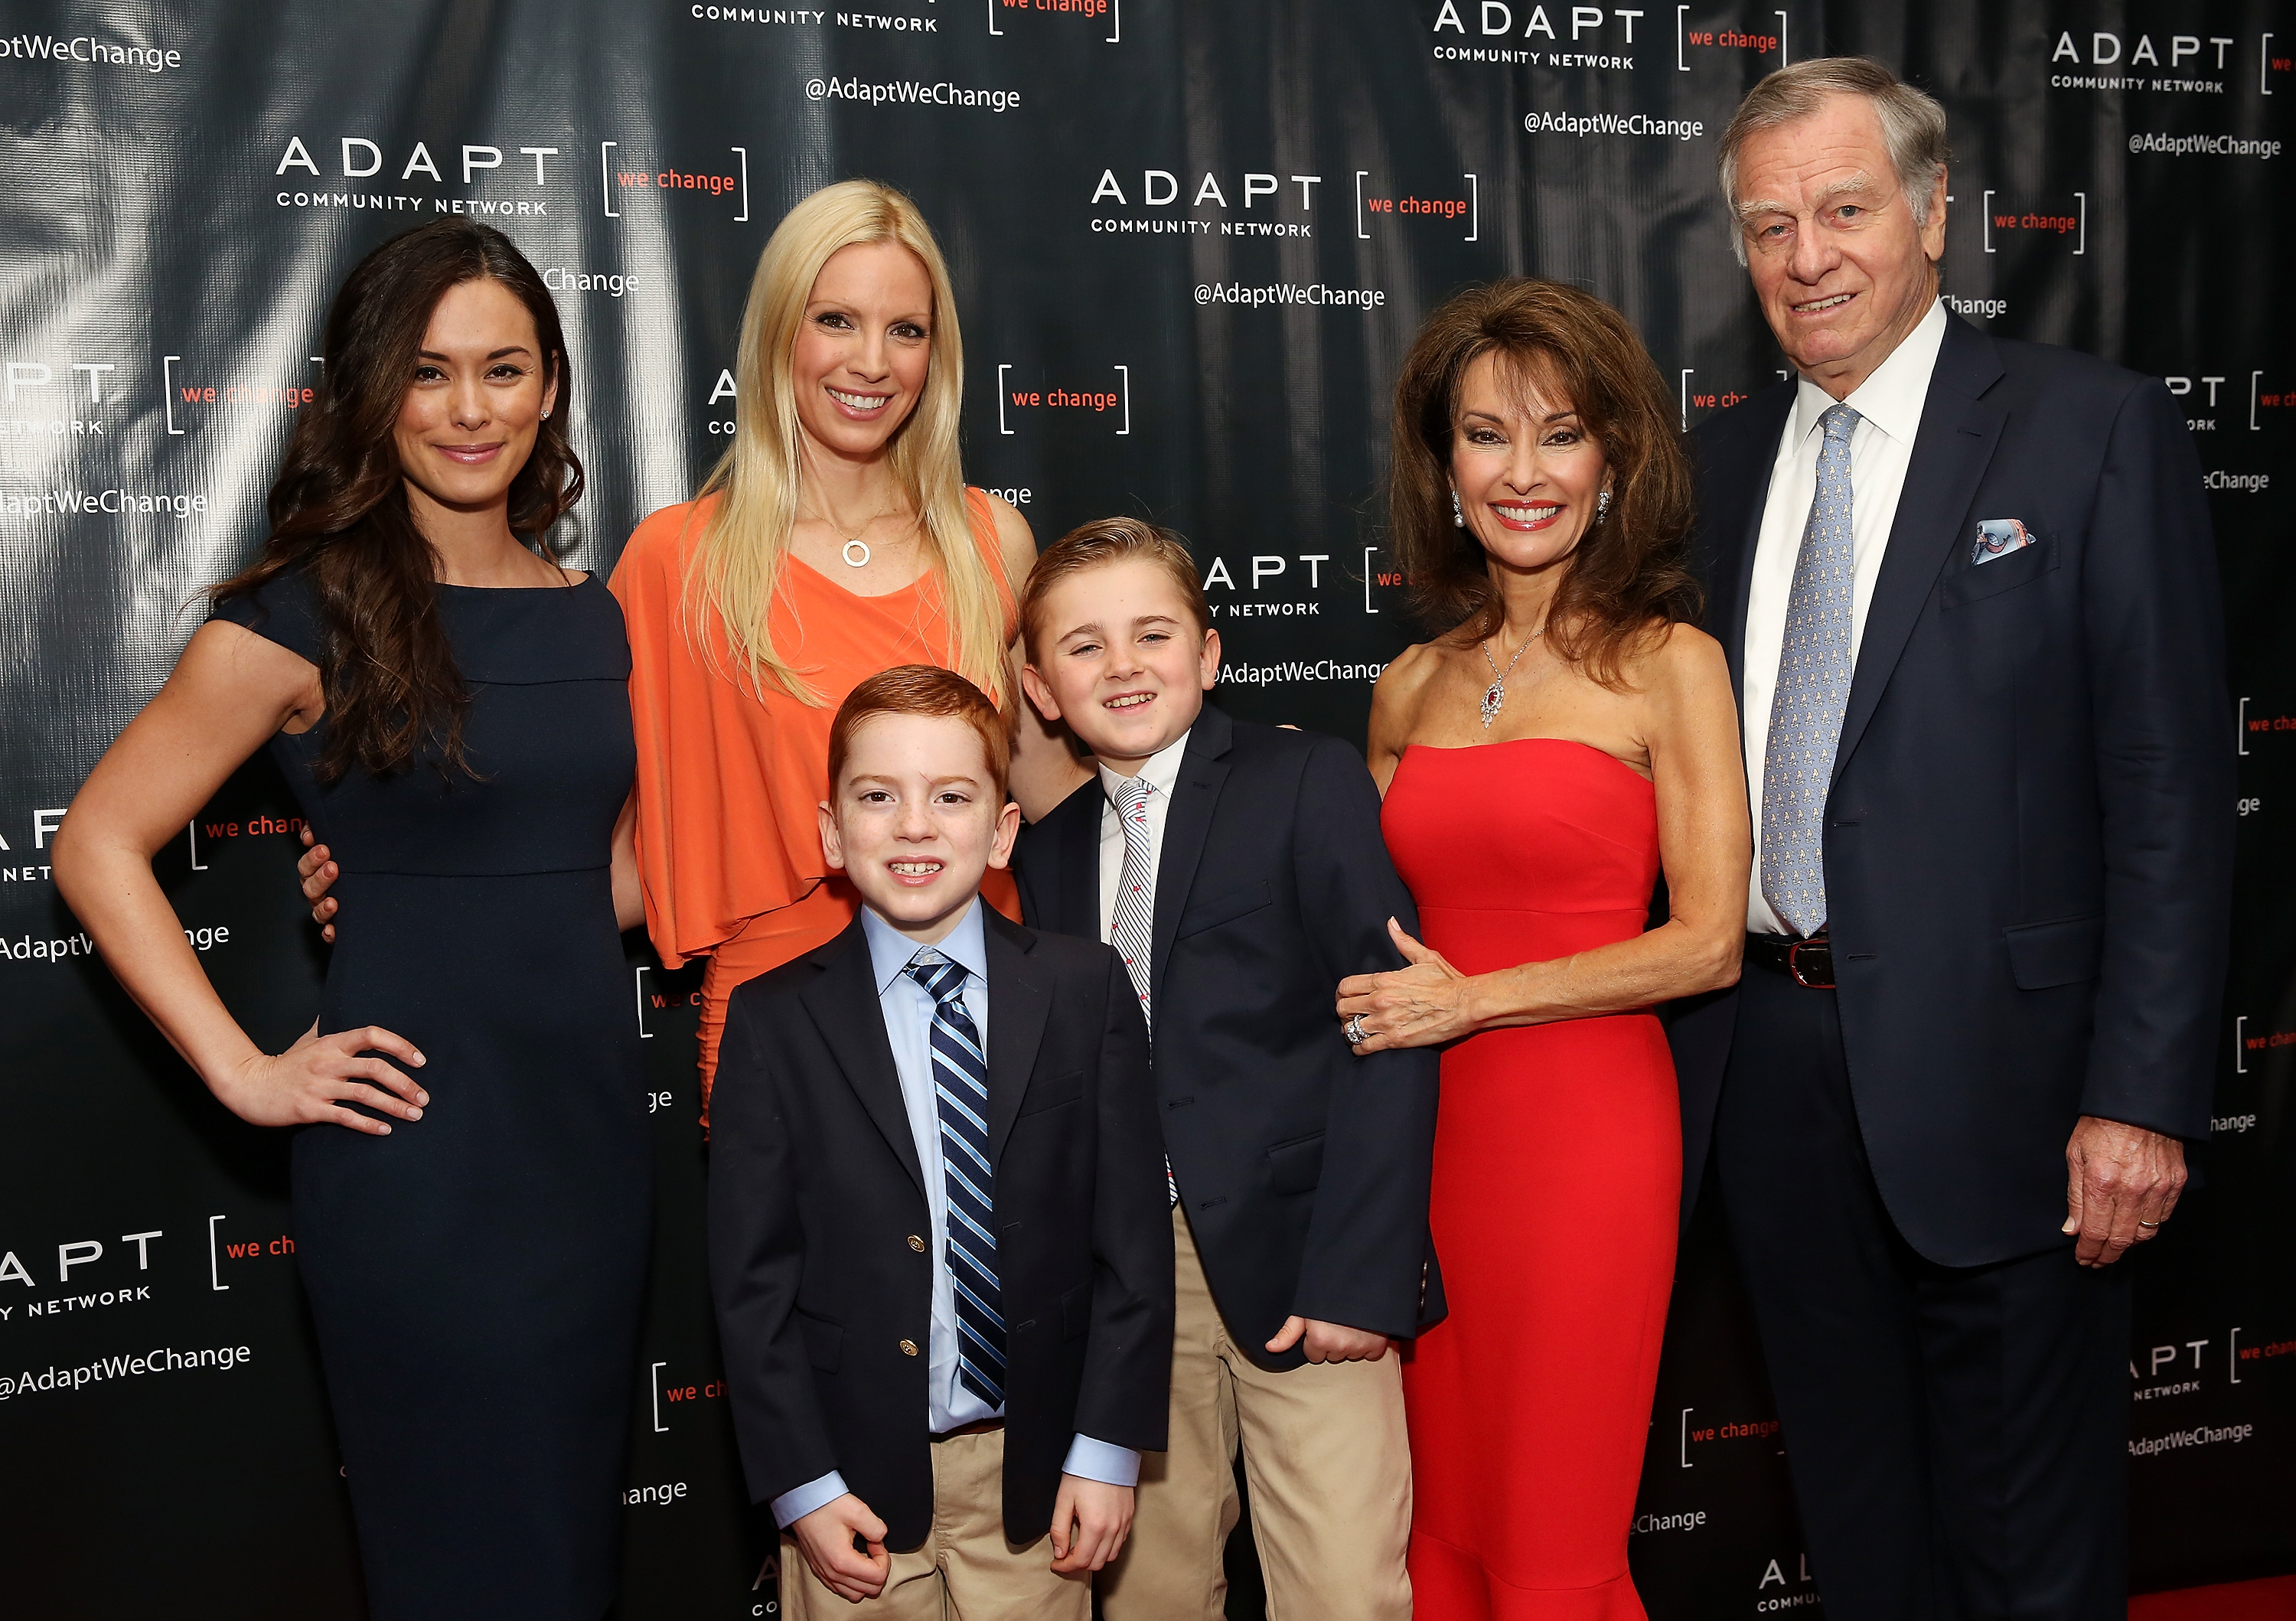 (L-R) Courtney Velasco, Liza Huber, Brendan Hesterberg, Royce Alexander Hesterberg, Susan Lucci and Helmut Huber attend the UCP of NYC 70th Anniversary Celebration Gala, at New York Hilton Midtown, on March 9, 2017, in New York City. | Source: Getty Images